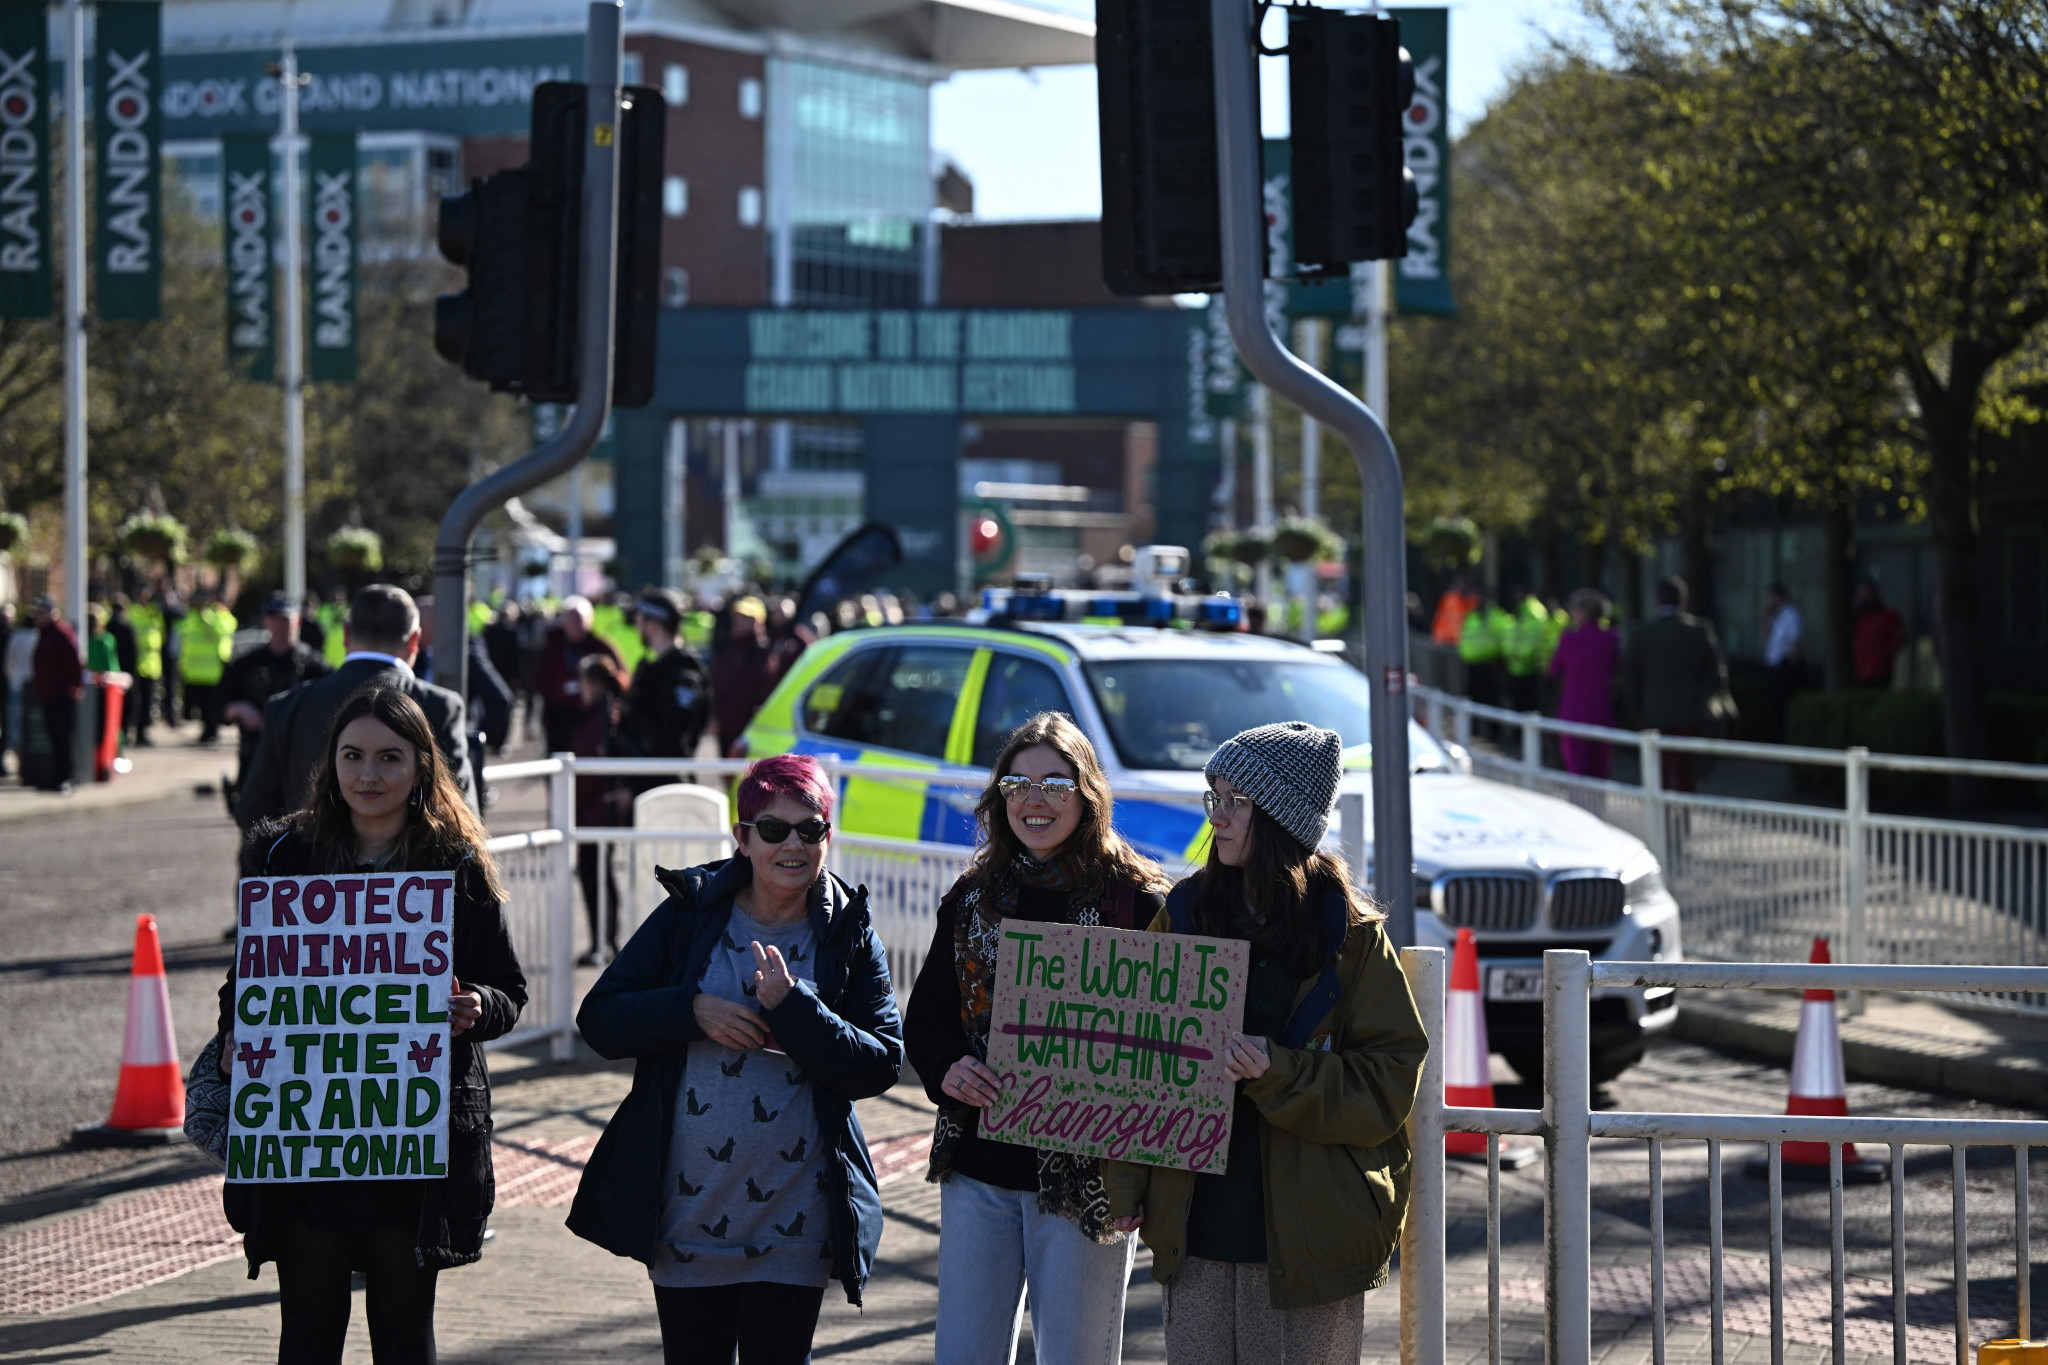 A protest was also held outside Aintree Racecourse in the build-up to the race, calling for it to be cancelled ©Getty Images